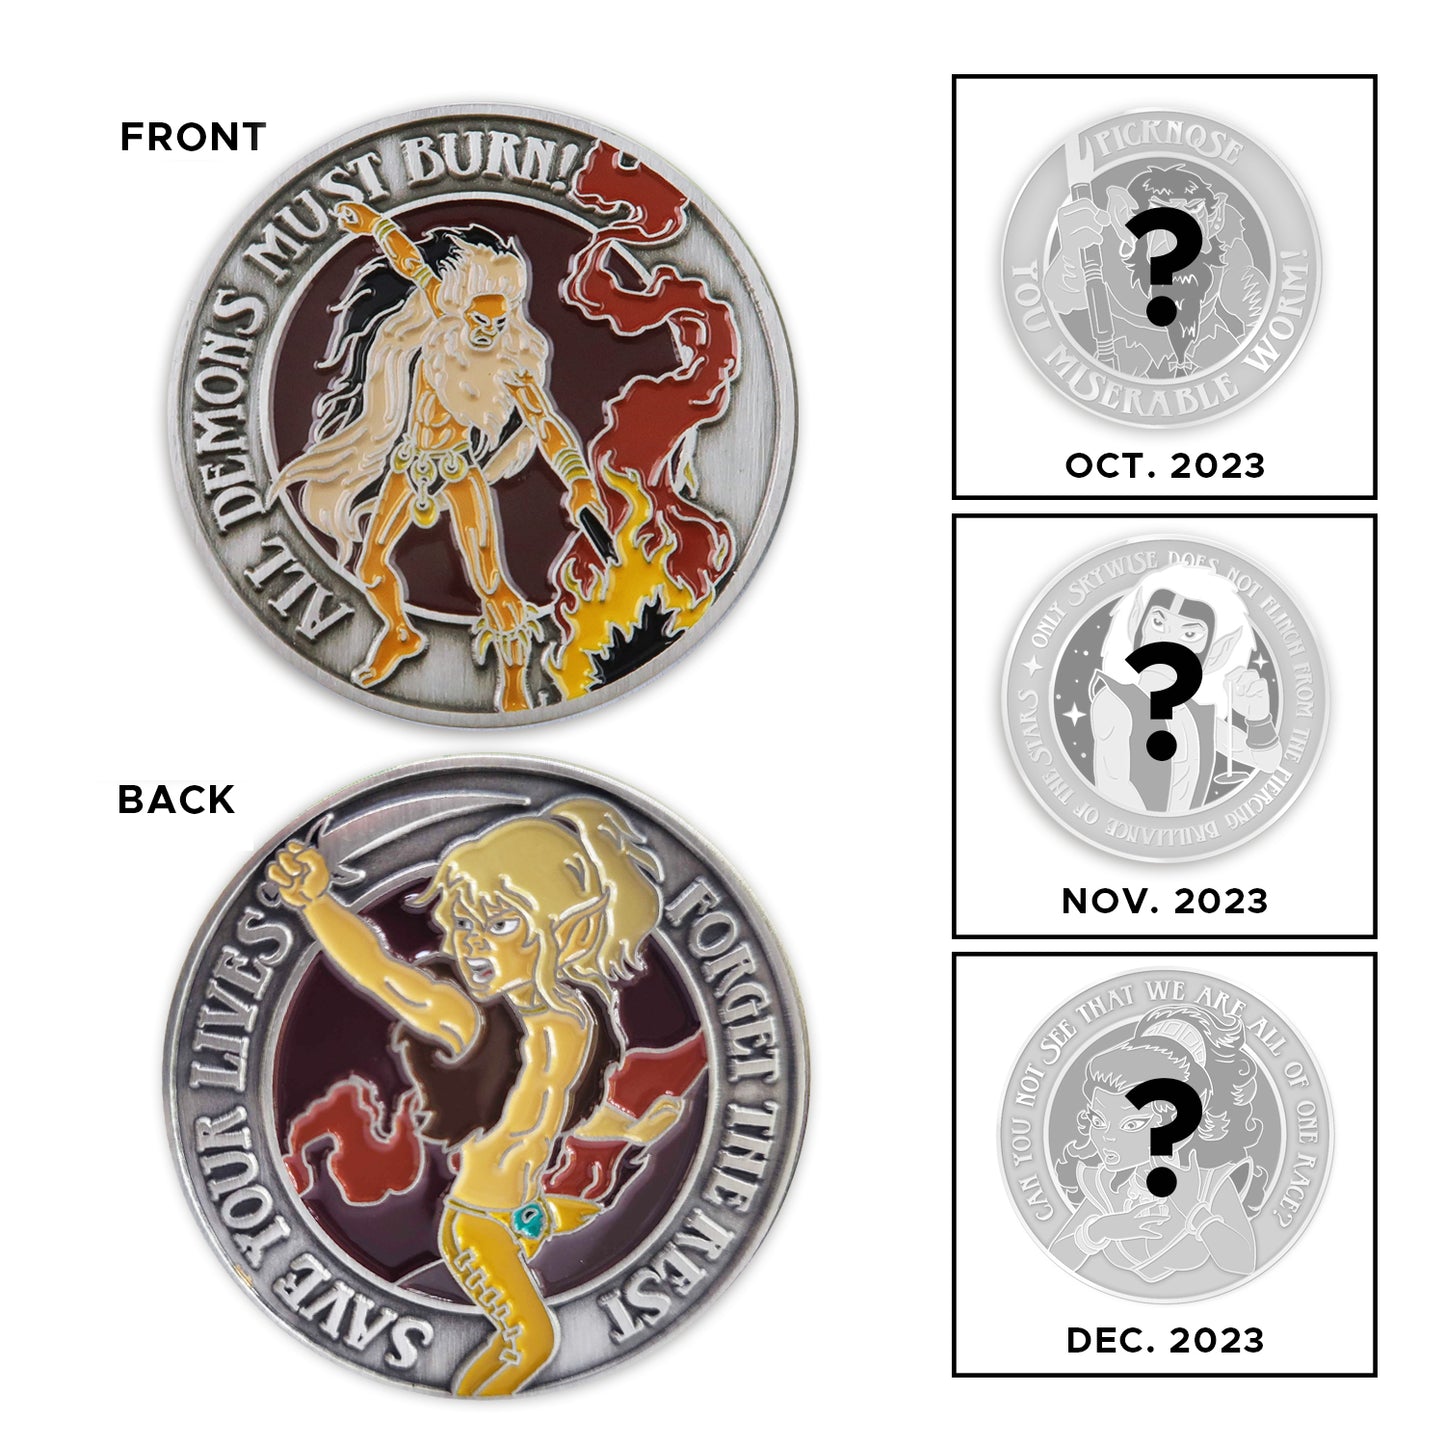 A front and back image of a brass challenge coin. On the front is a drawing of the Elfquest character Leetah. Raised text around the edge says “all demons must burn.” The back of the coin depicts the characters Nightfall and Redlance. Around the edge, raised text says “Save your lives, forget the rest.” Next to the front and back are unfinished examples of upcoming Elfquest coins, in grey, with black question marks superimposed over each.